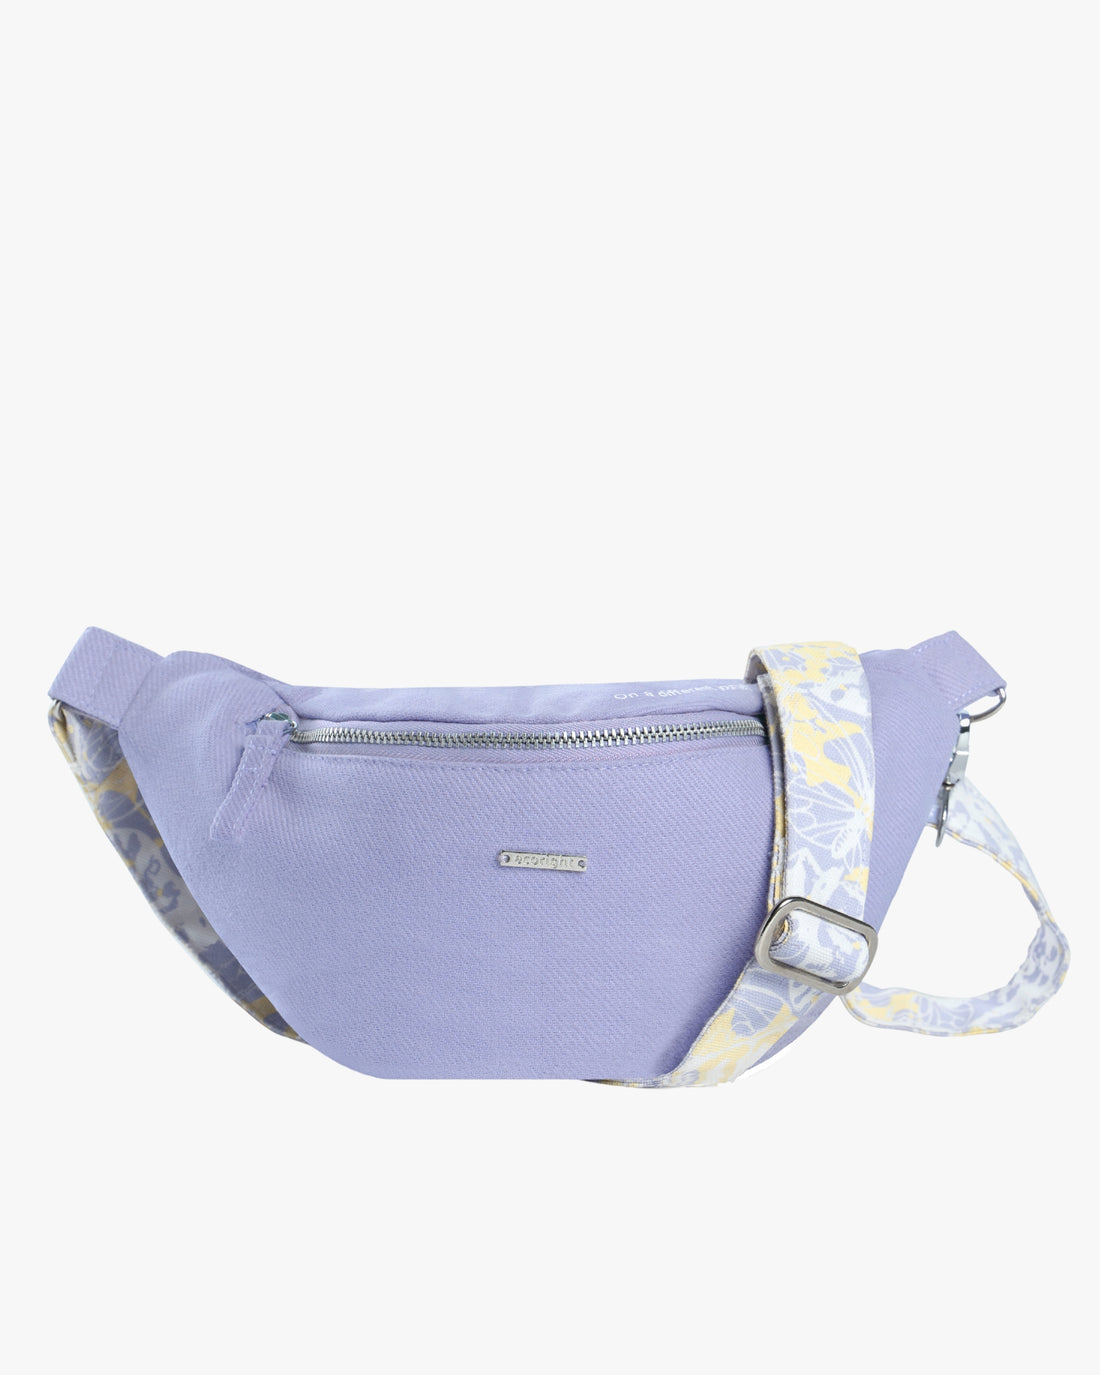 Fanny pack, Lilac colour bag, Waist bag, Cute gifts for women, Ecoright